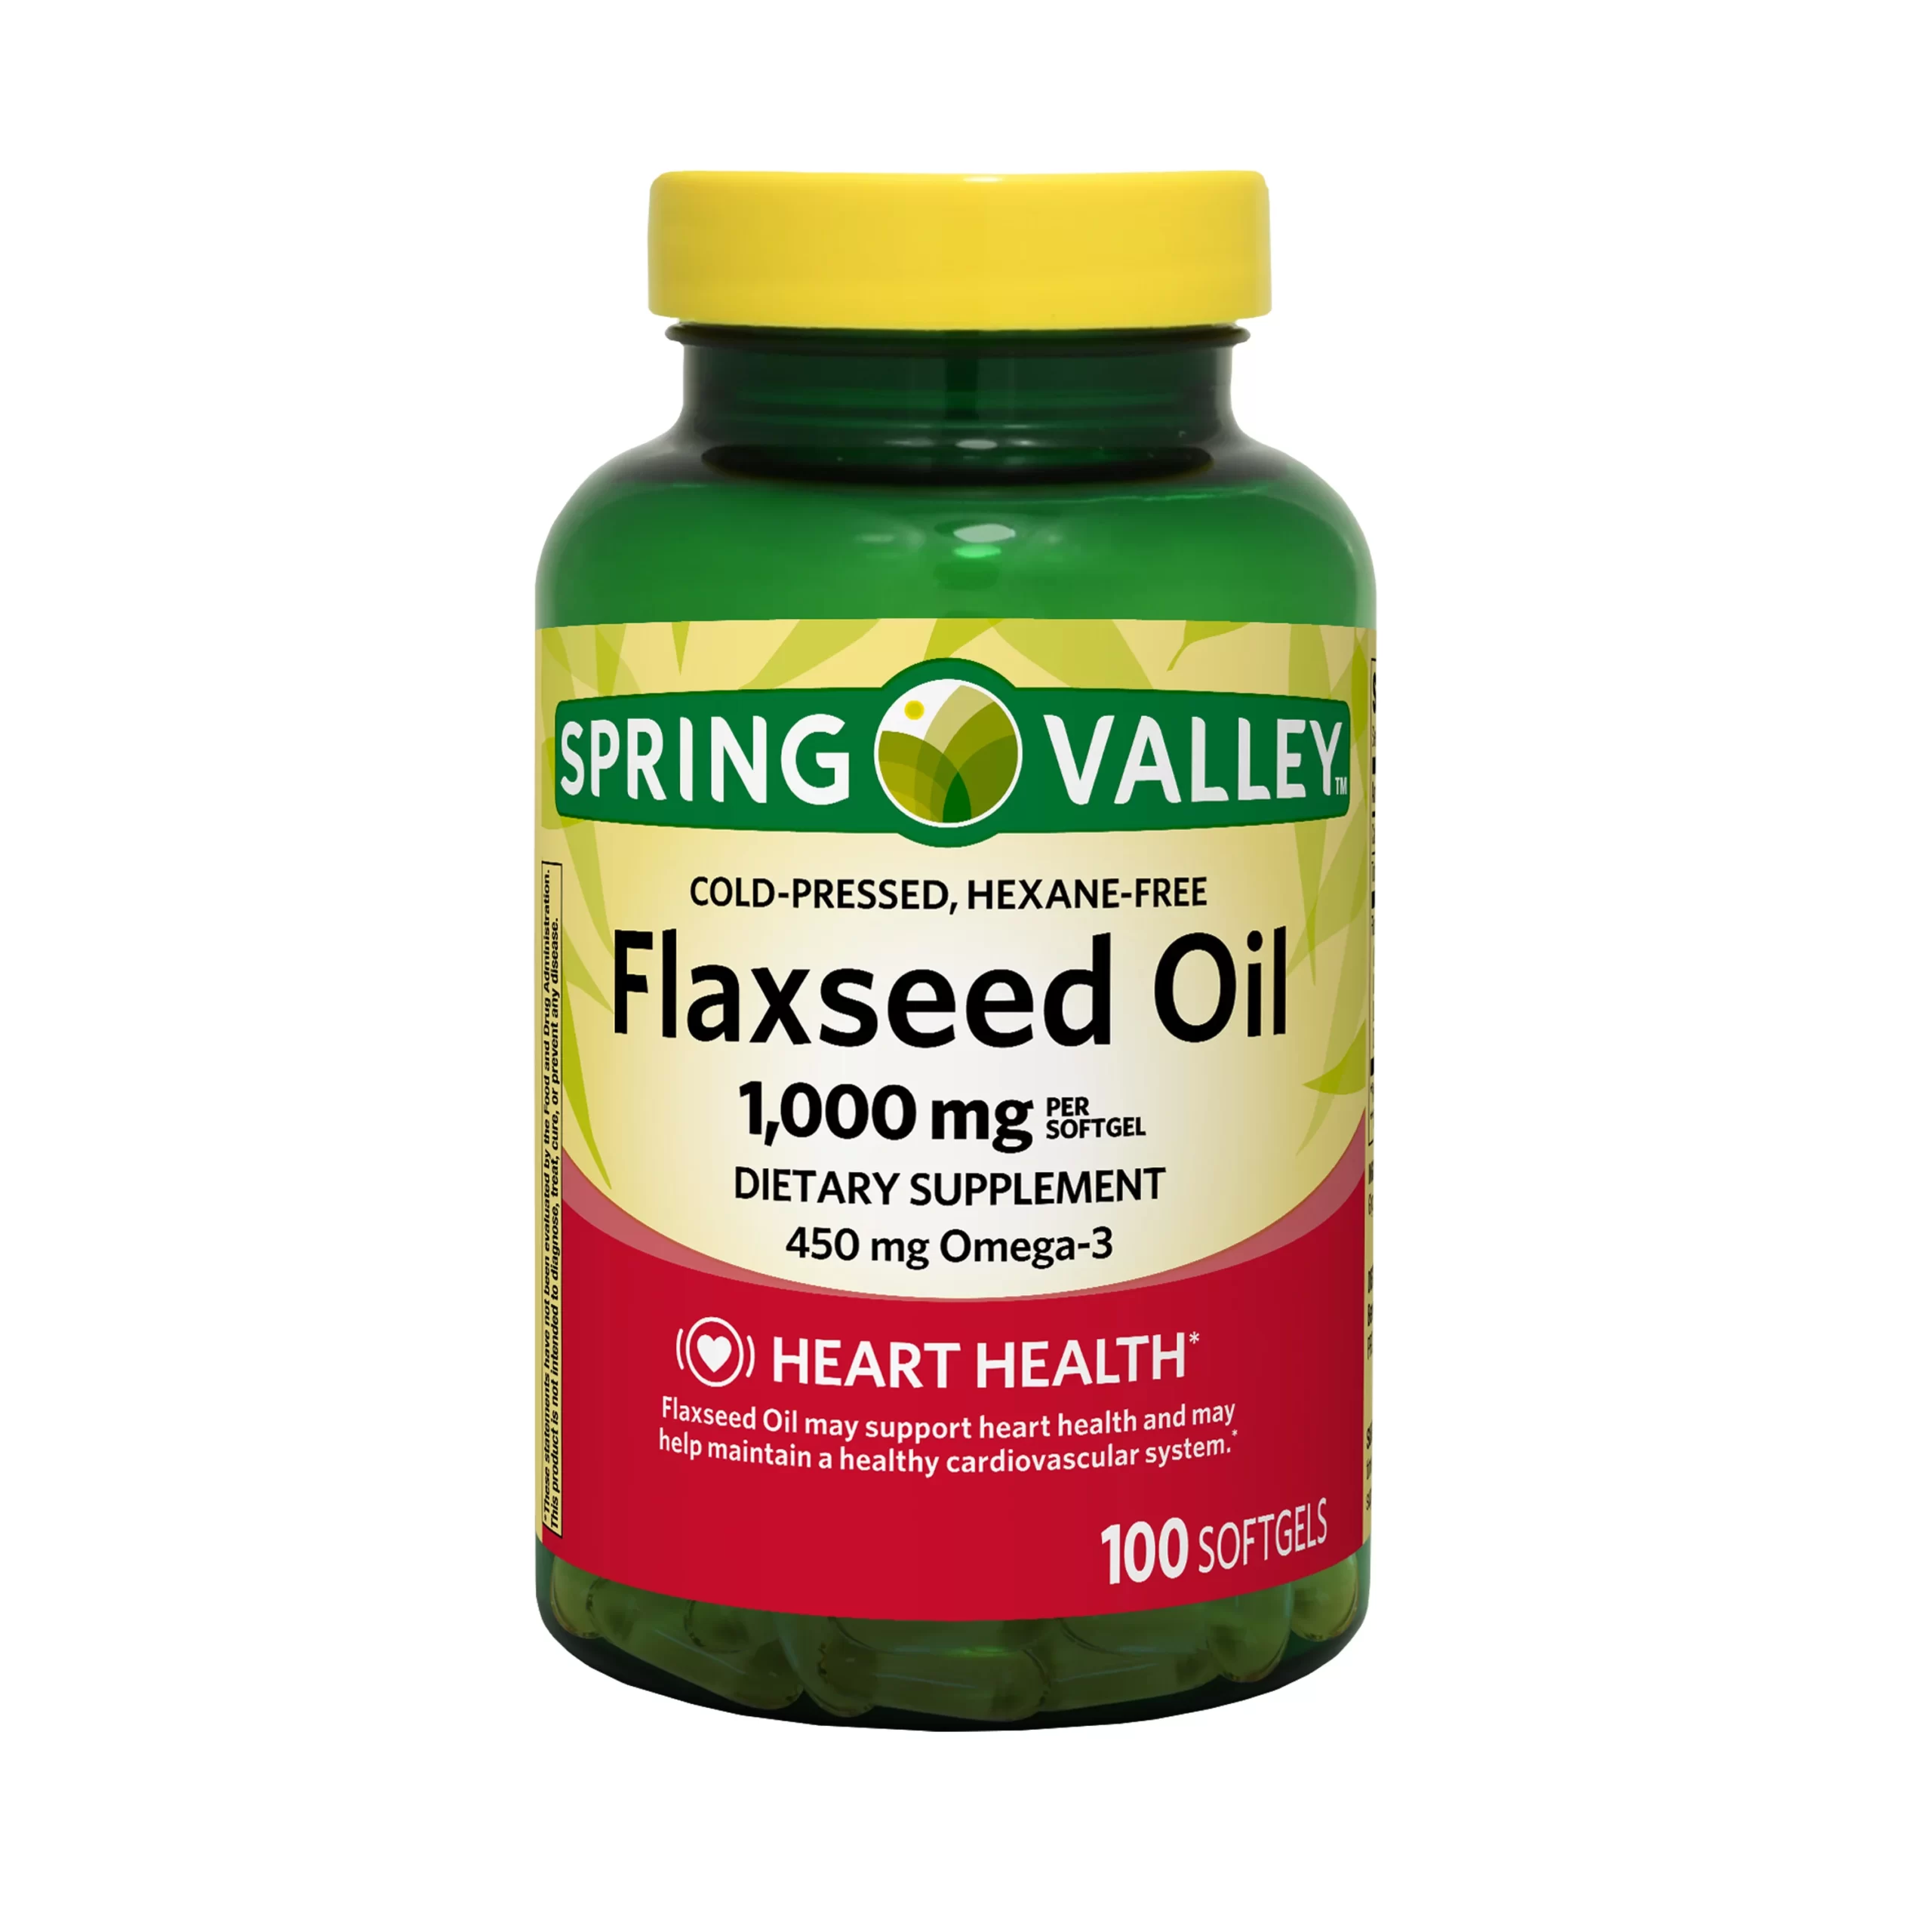 Spring Valley Flaxseed Oil, 1,000 mg Softgels, 100pcs